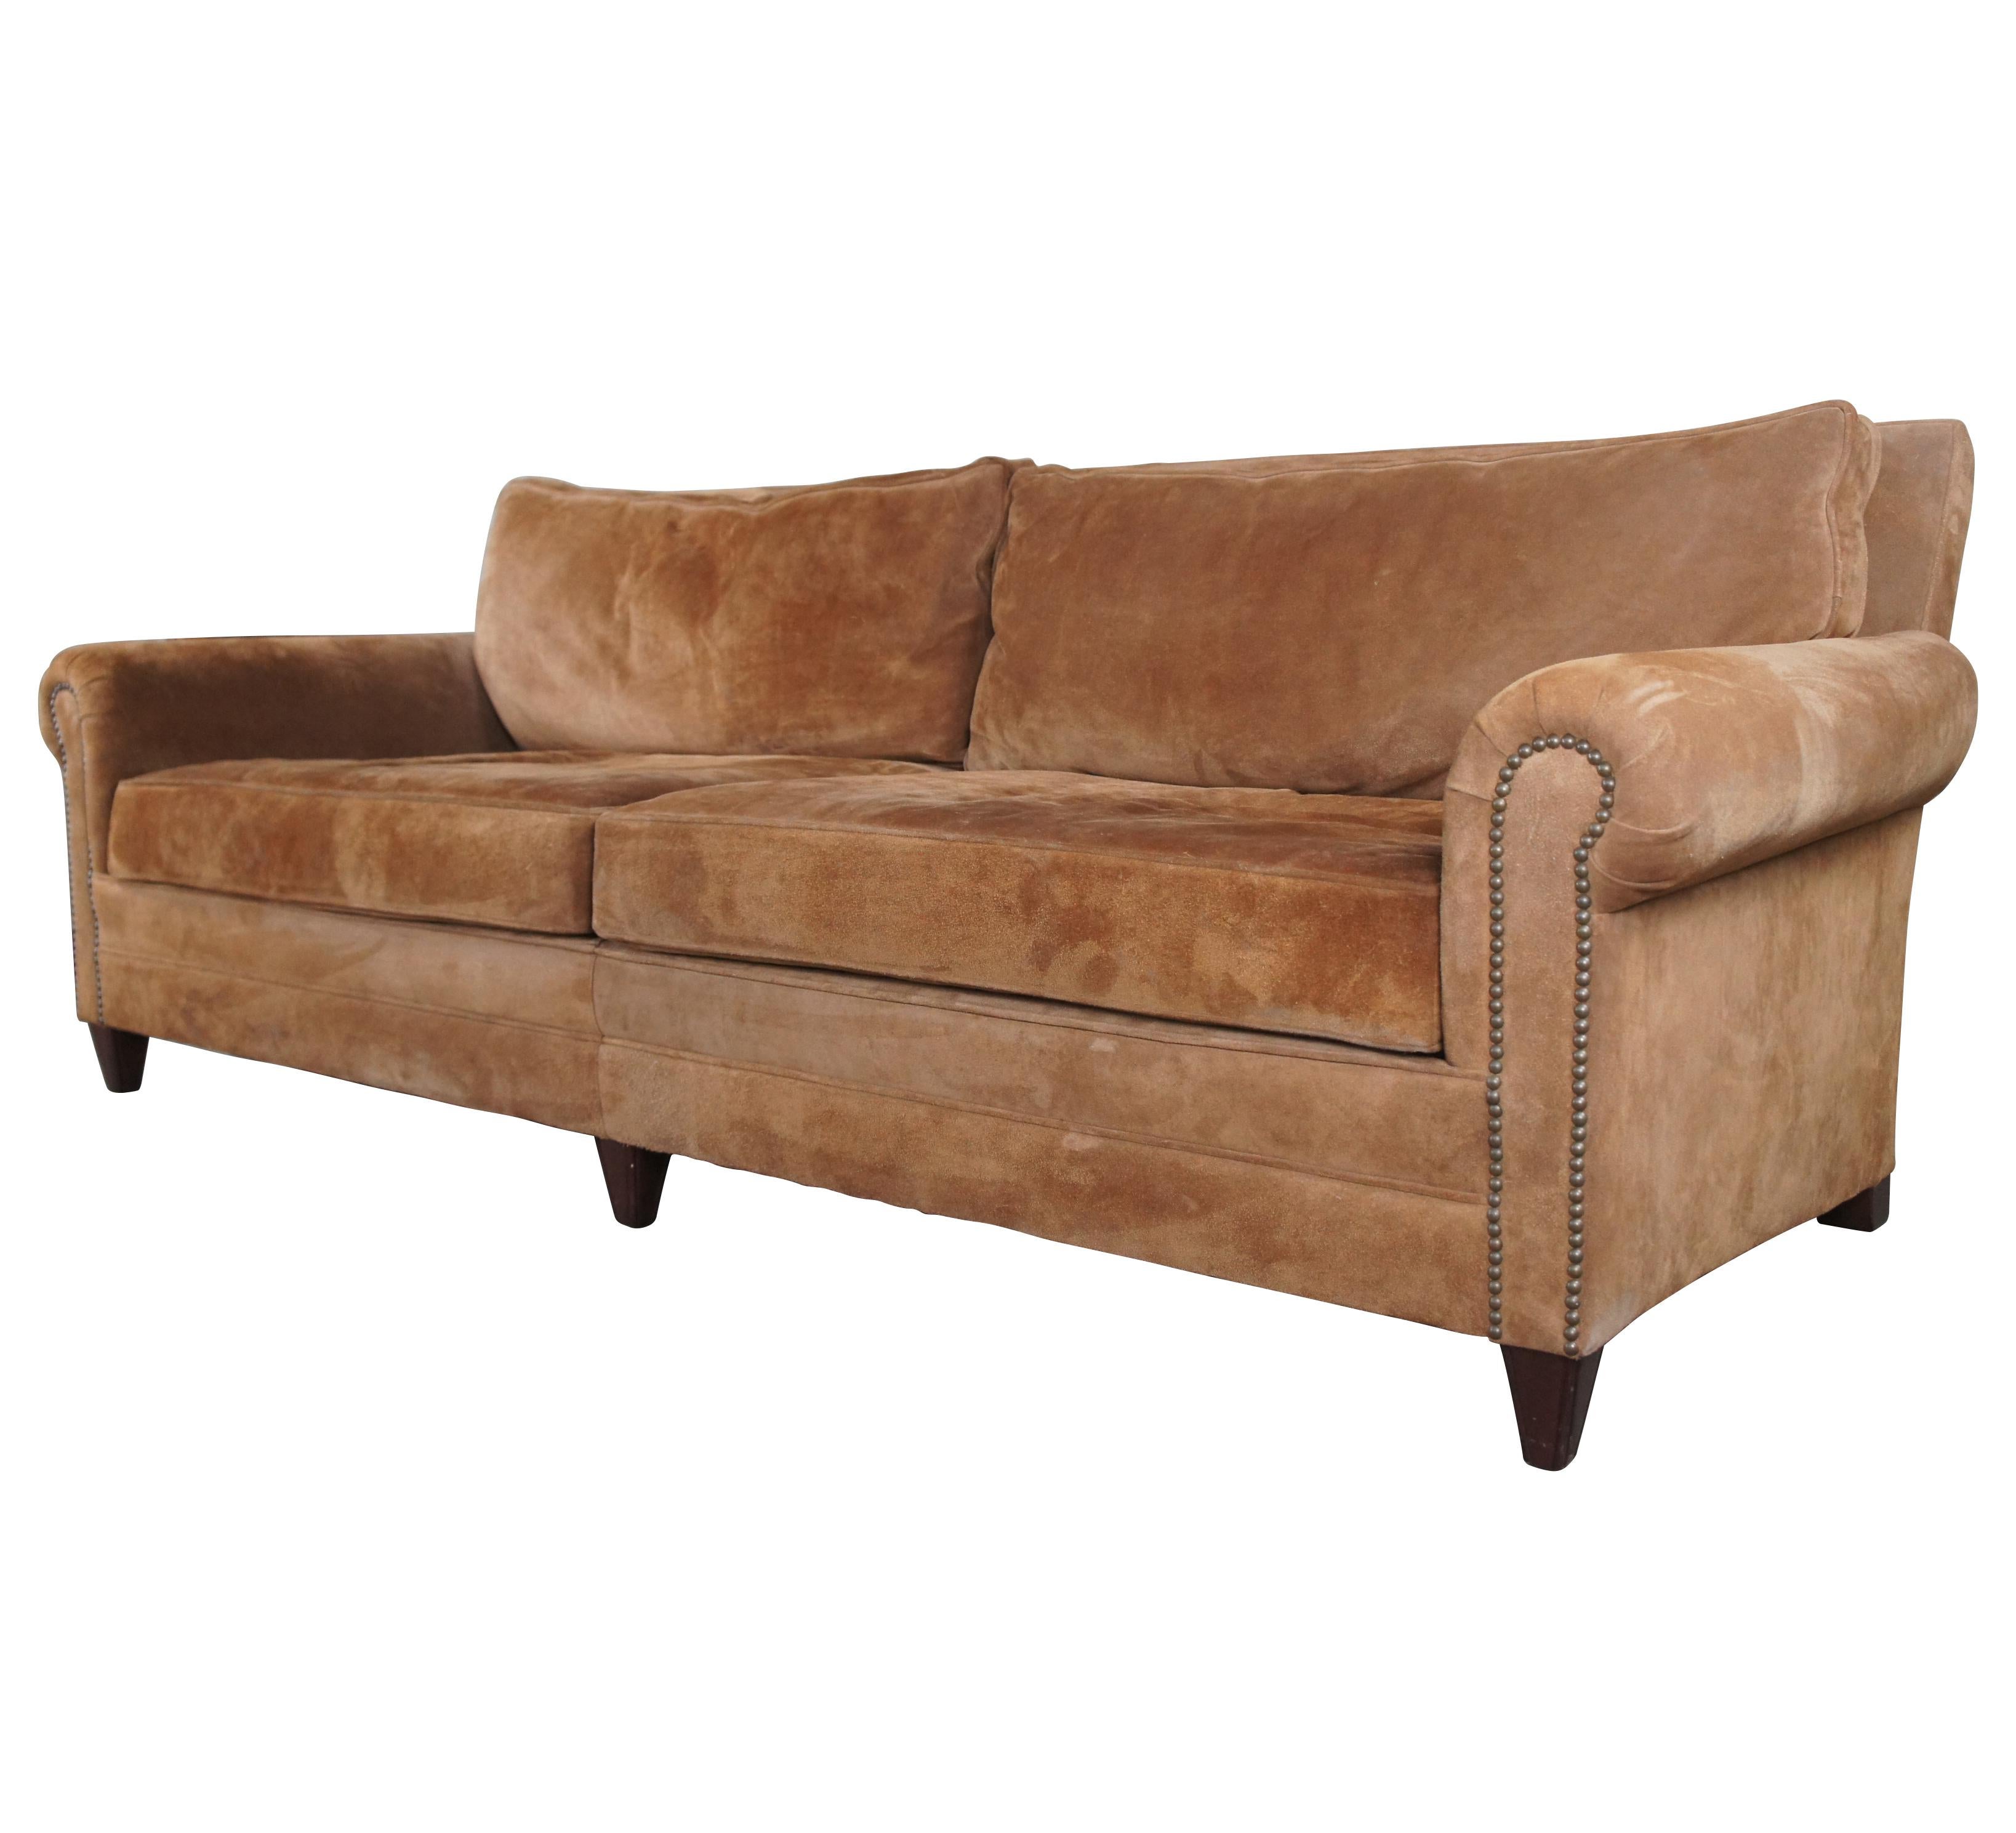 Vintage Ralph Lauren brown suede rolled arm sofa or couch featuring nailhead trim and deep luxury depth. MSRP $15,000, measure: 89